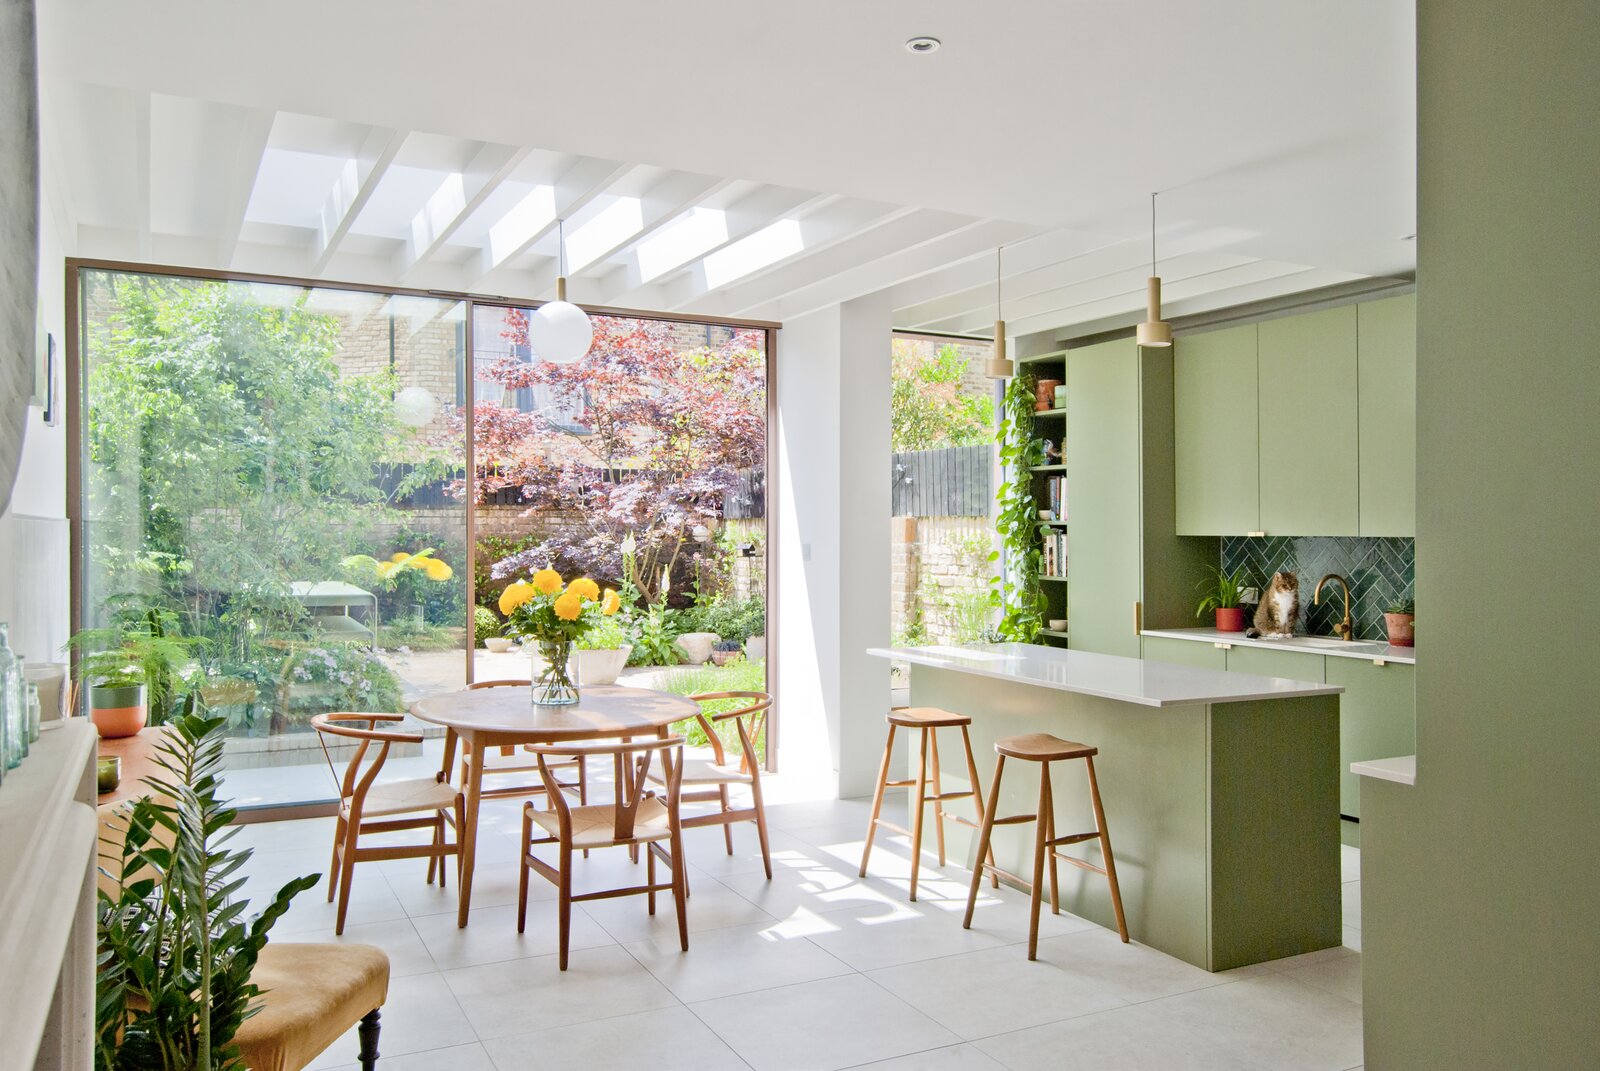 A London Terrace House Gets a Bright Extension That Honors Its Arts and Crafts Heritage